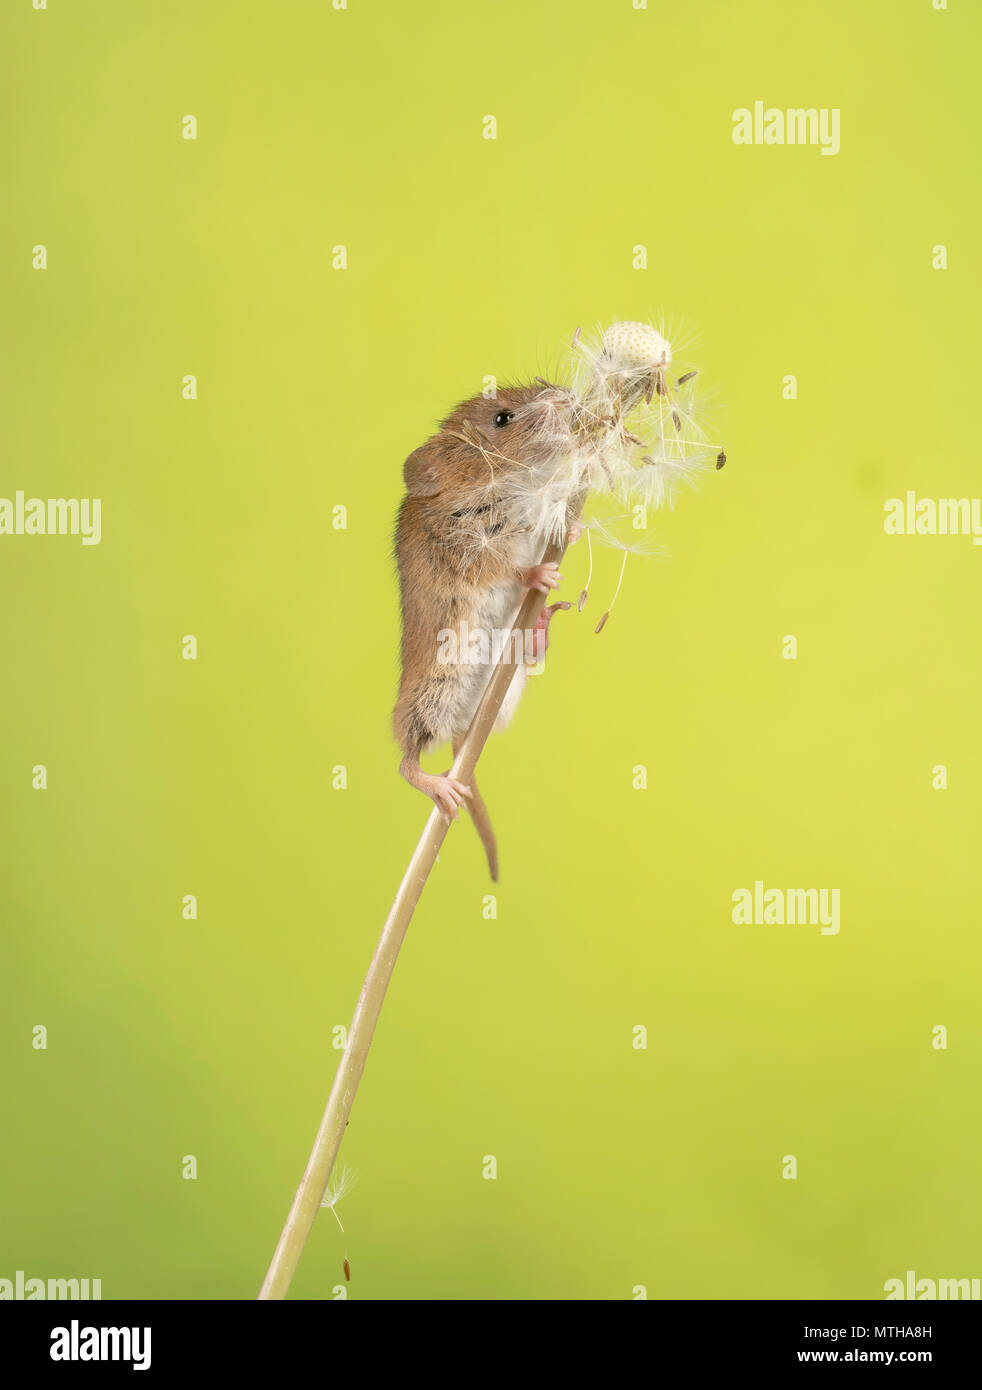 A harvest mouse climbing on and eating a dandelion Stock Photo